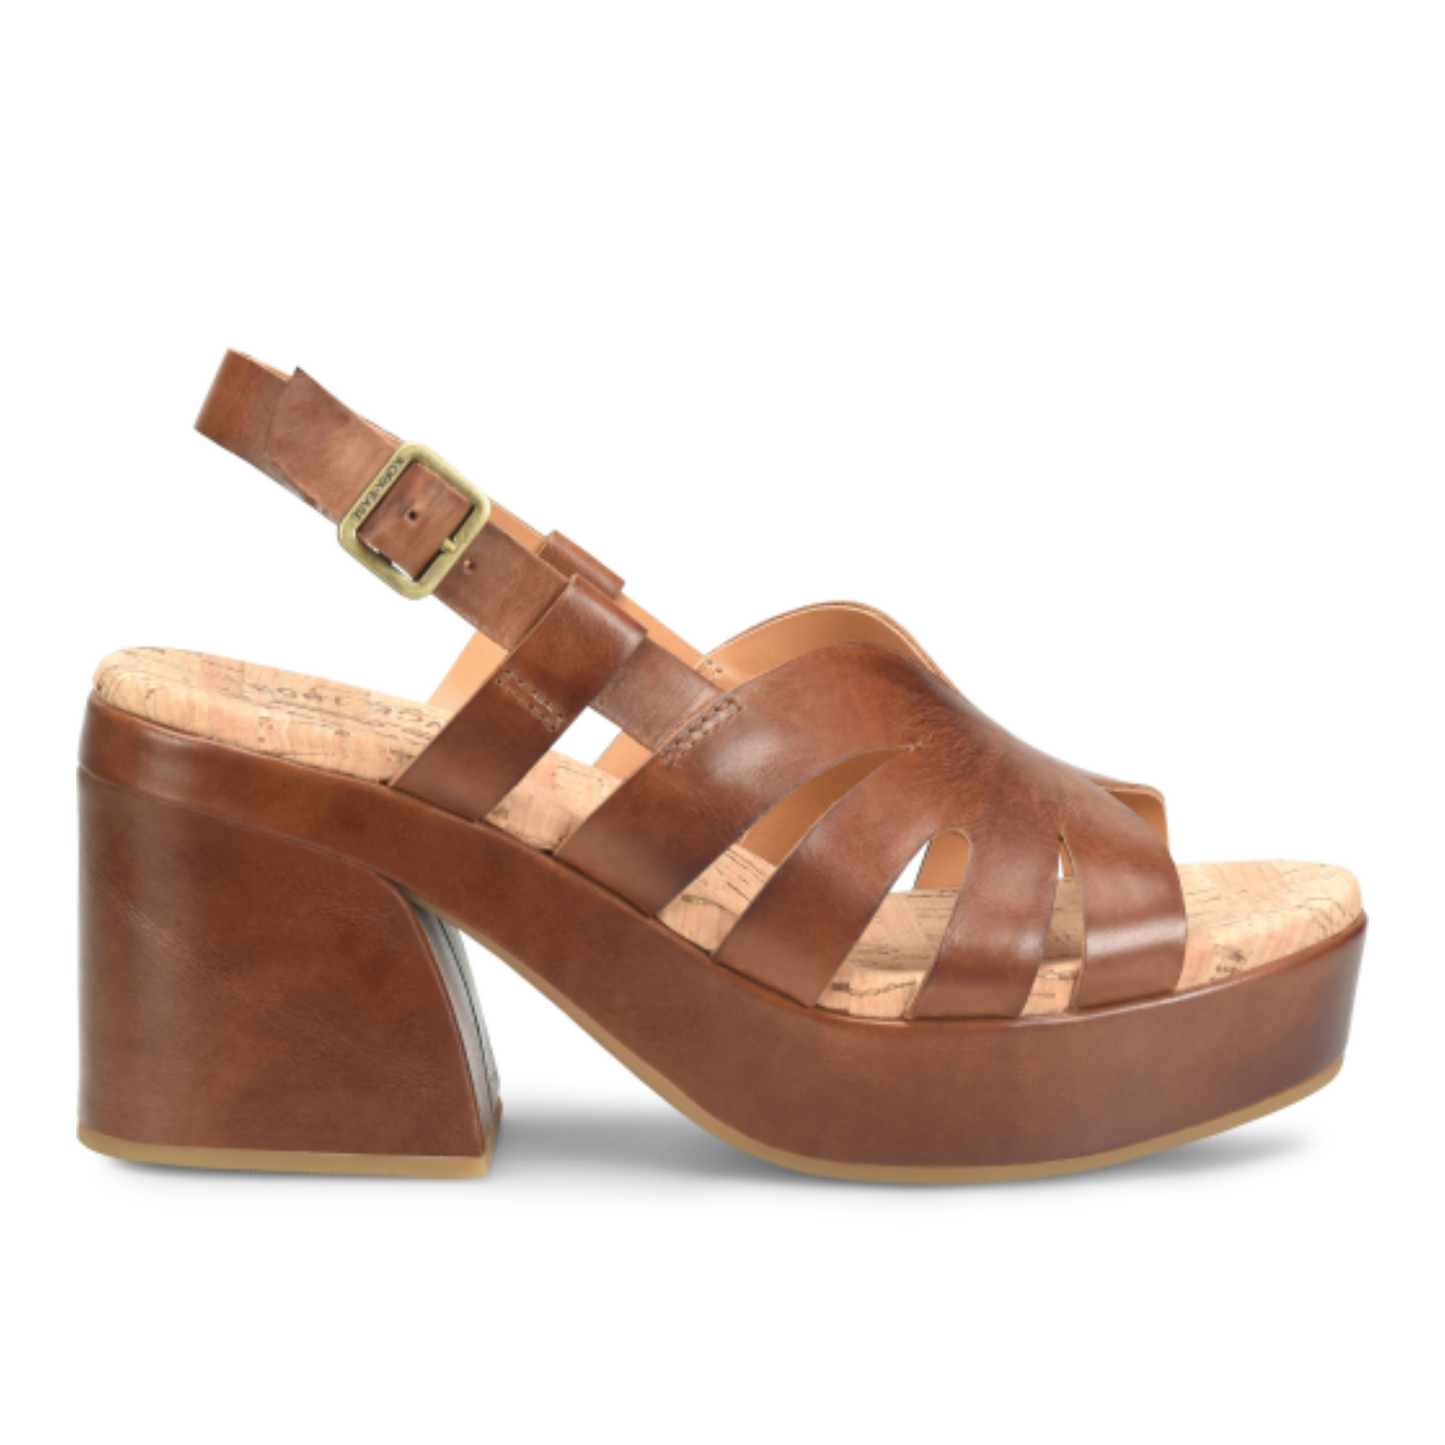 Side view of The Kork-Ease Paschal Slingback Sandal in Brown Leather